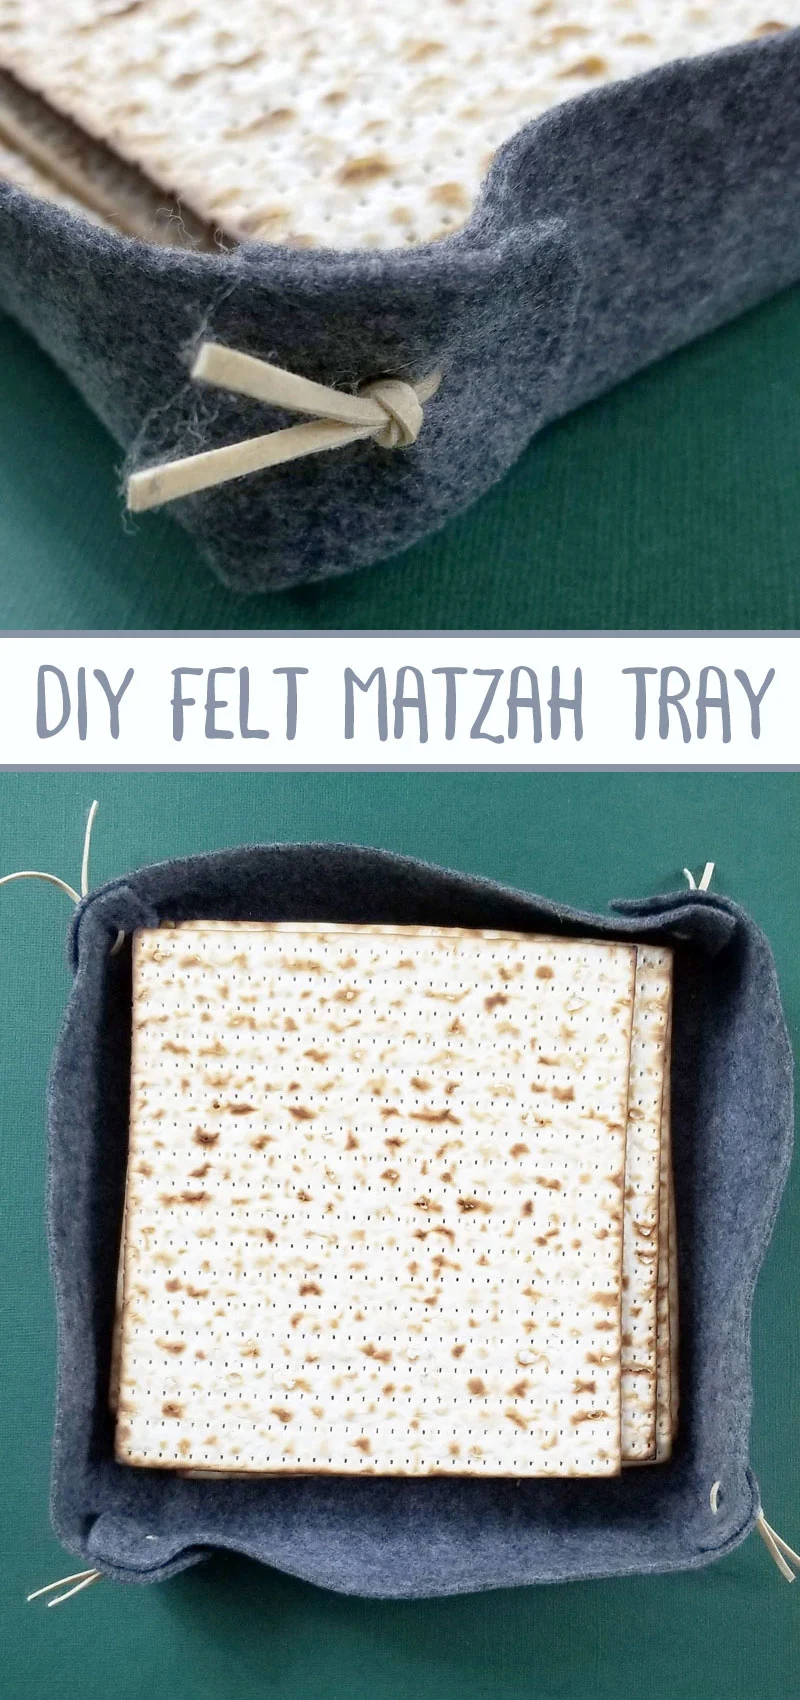 Make your own matzah tray or plate for the passover seder! One of my favorite DIY Pesach seder table decorations and ideas